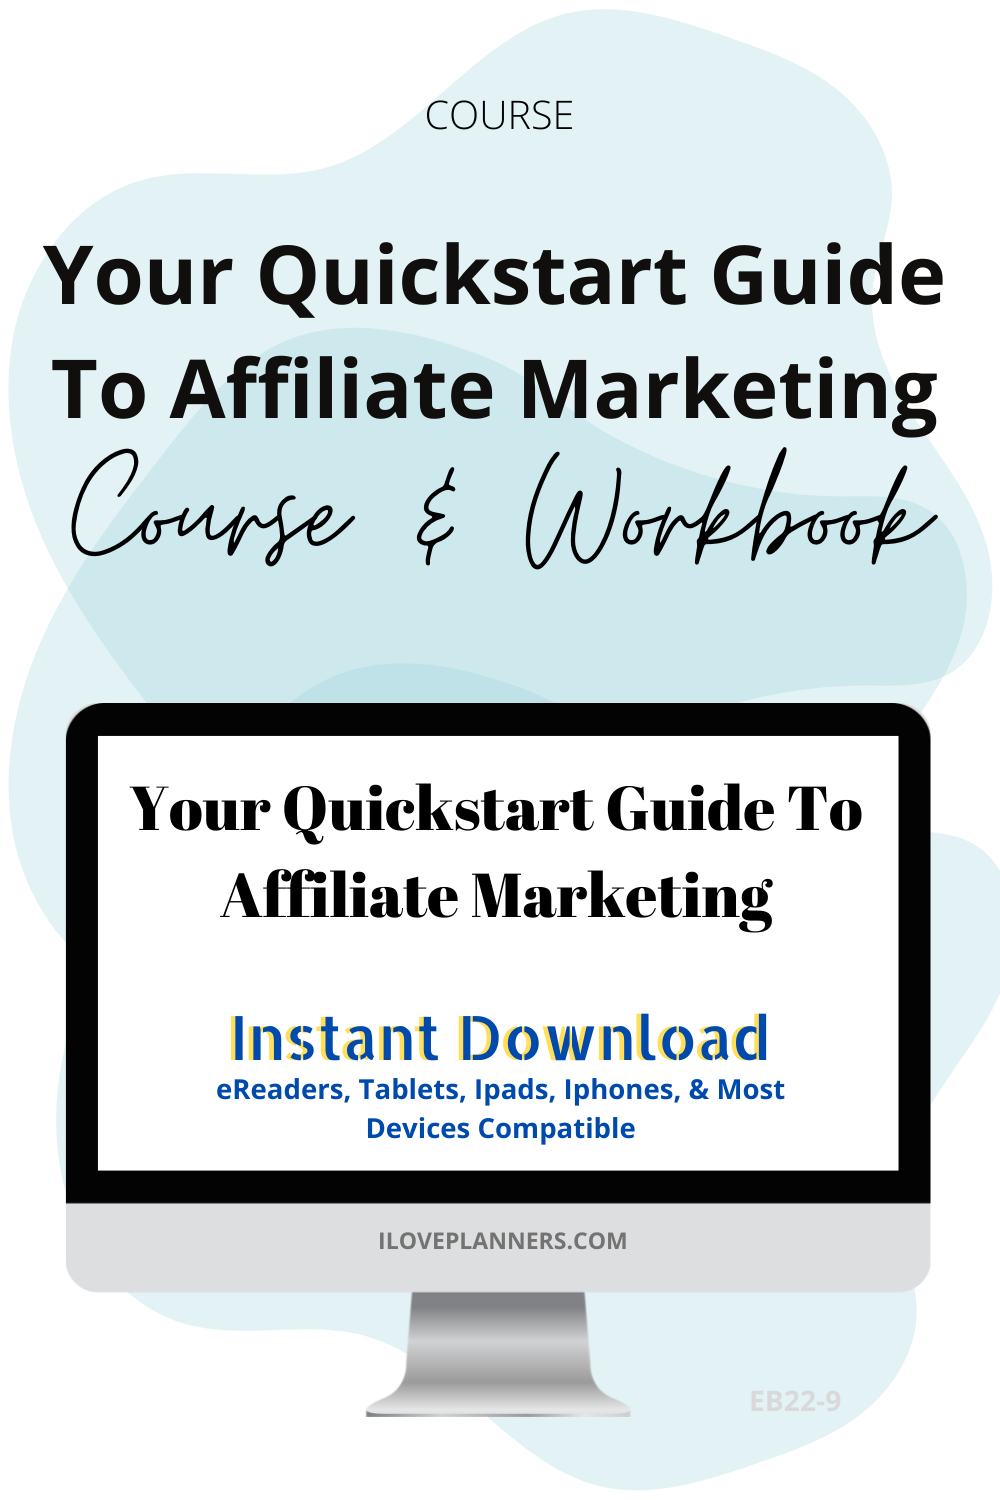 Your Quickstart Guide To Affiliate Marketing Course & Workbook. EB22-9